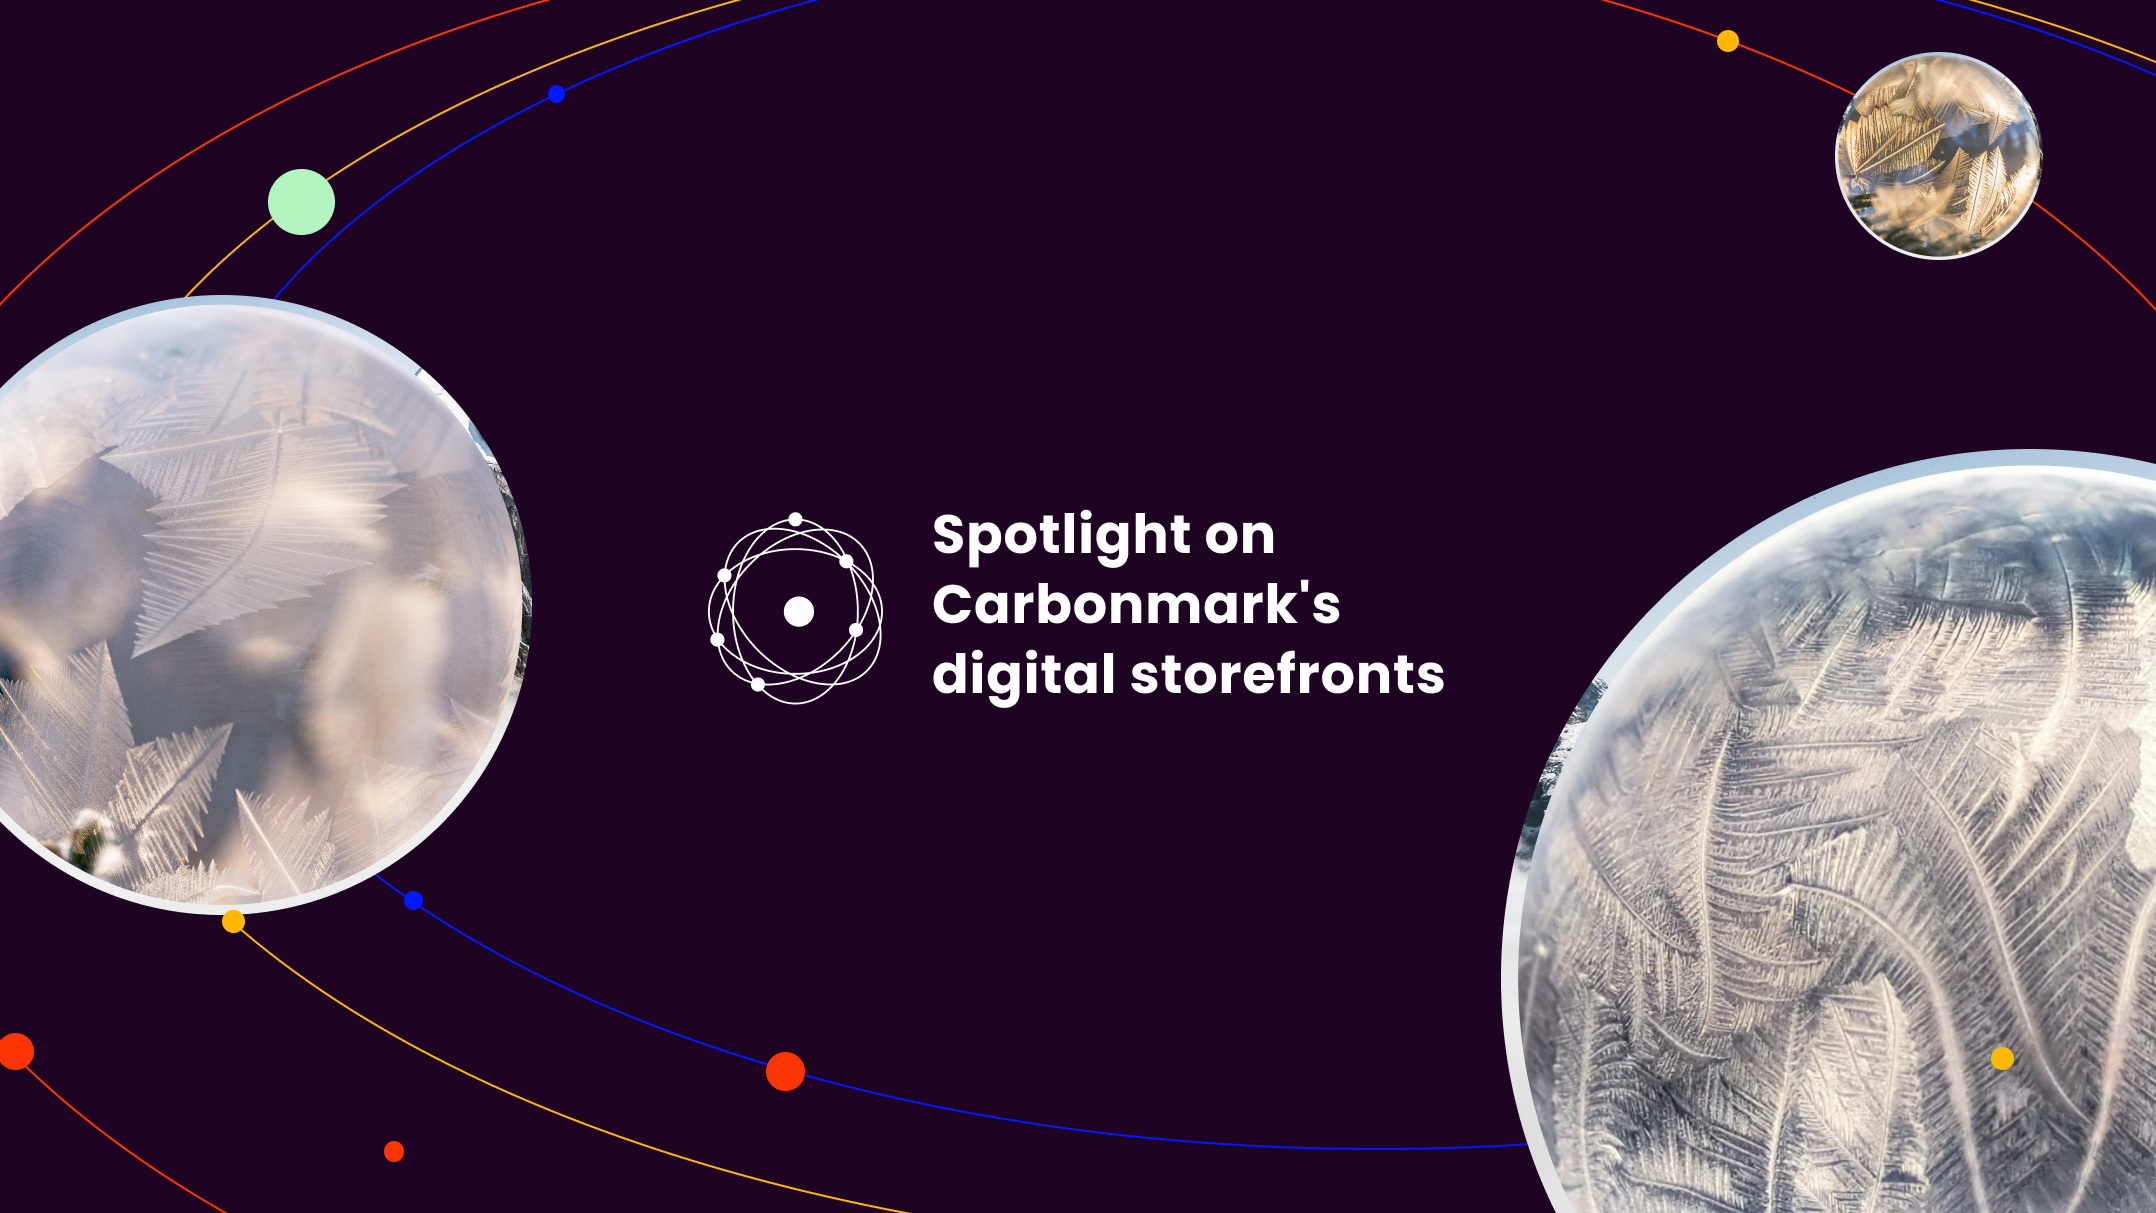 List now on Carbonmark: Digital storefronts open up new credit sales channels